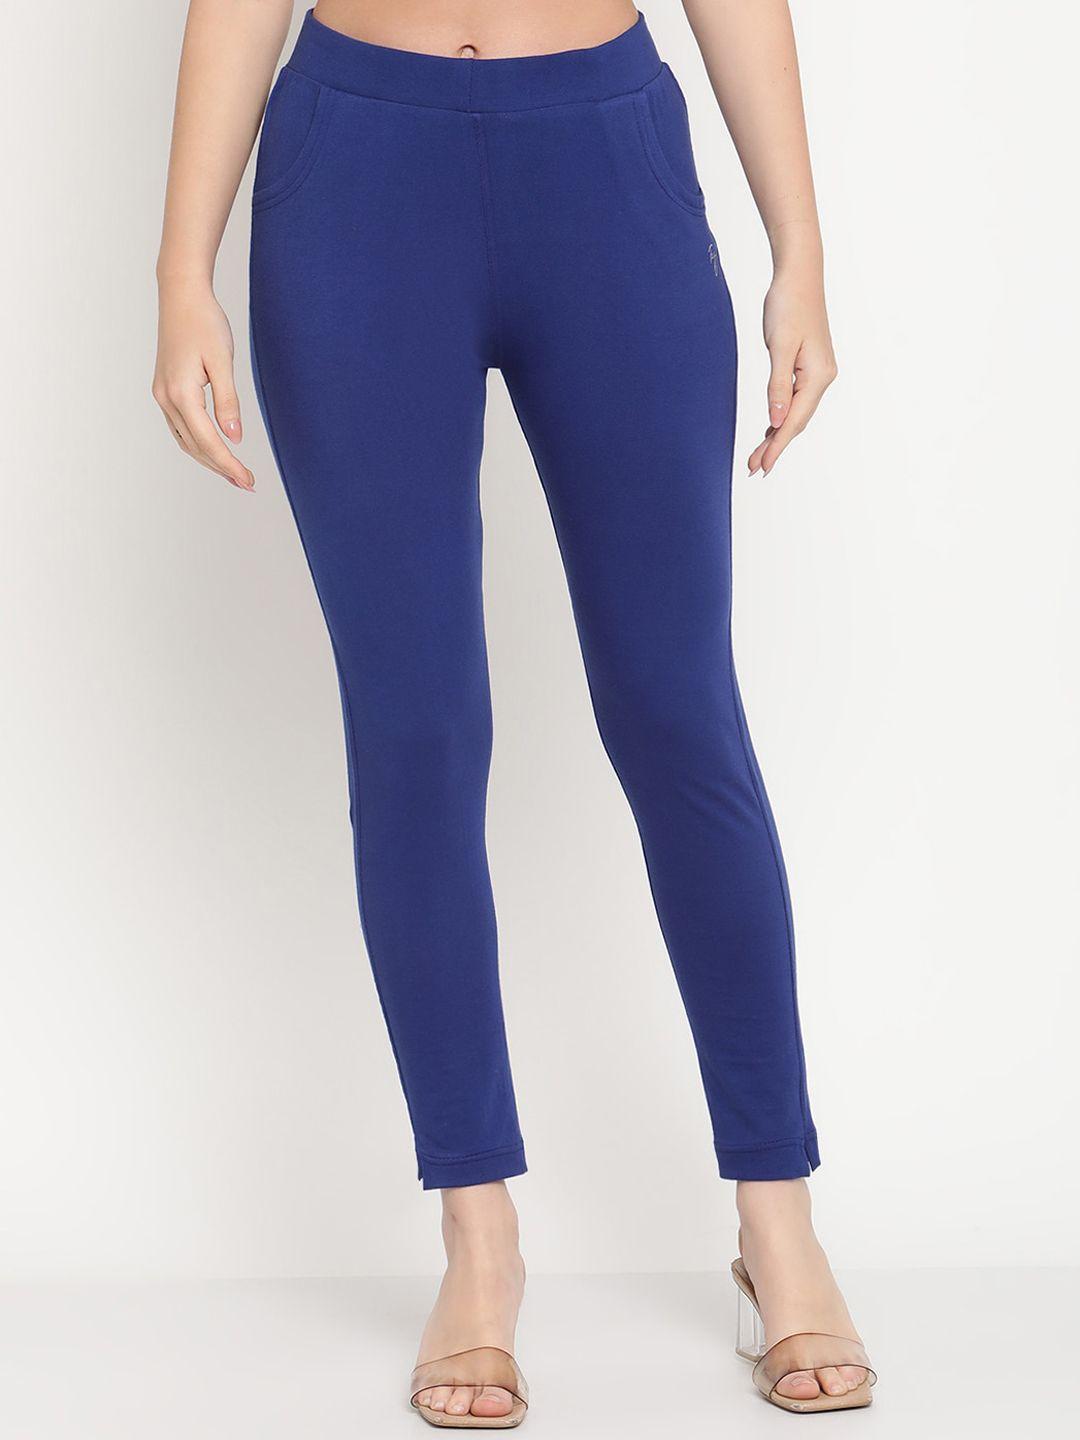 tag-7-women-blue-solid-ankle-length-leggings